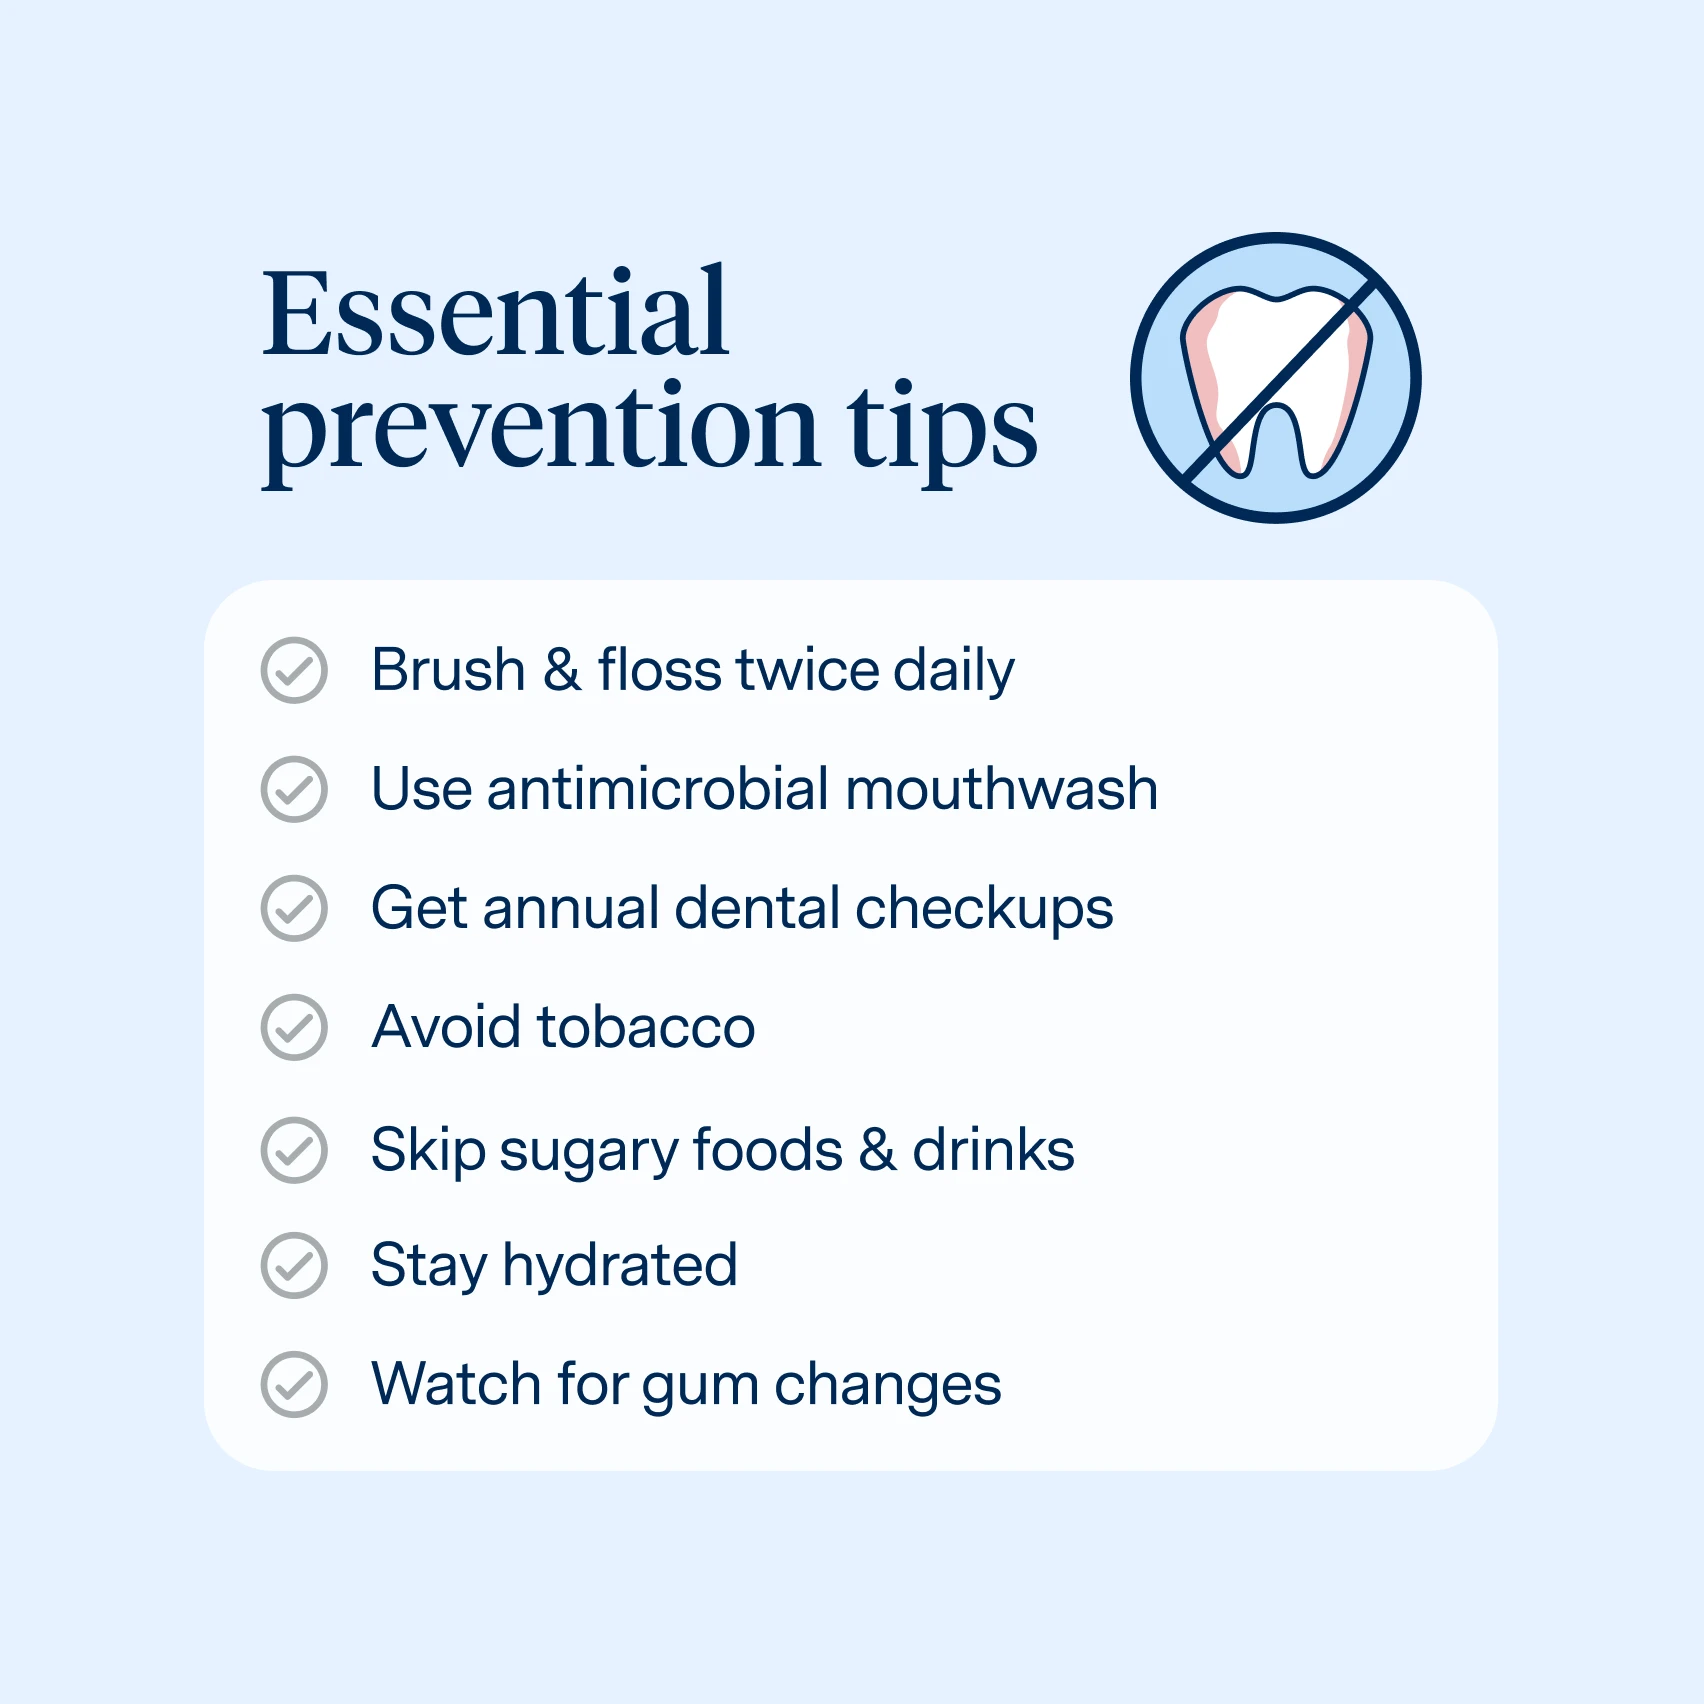 How to prevent gum disease
Brush & floss twice daily
Use antimicrobial mouthwash
Get annual dental checkups
Avoid tobacco
Skip sugary foods & drinks
Stay hydrated
Watch for gum changes